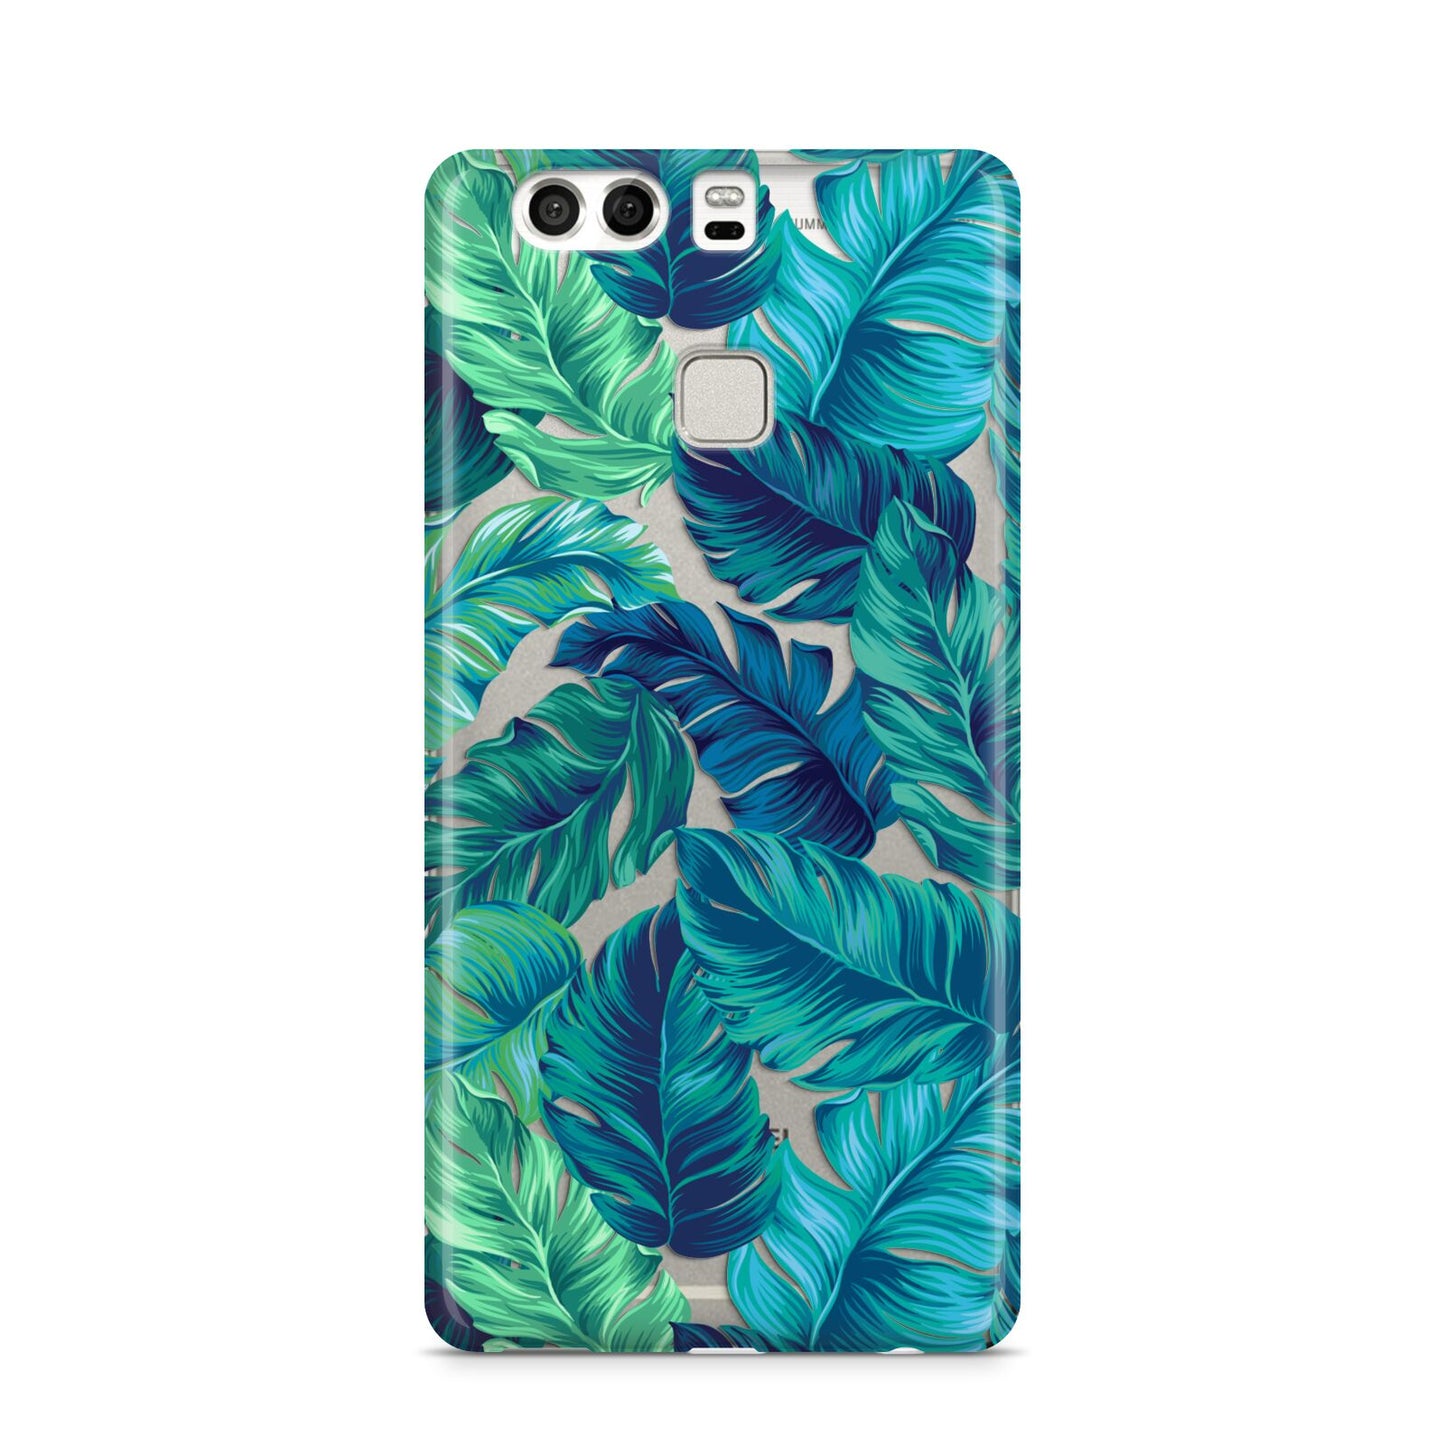 Tropical Leaves Huawei P9 Case